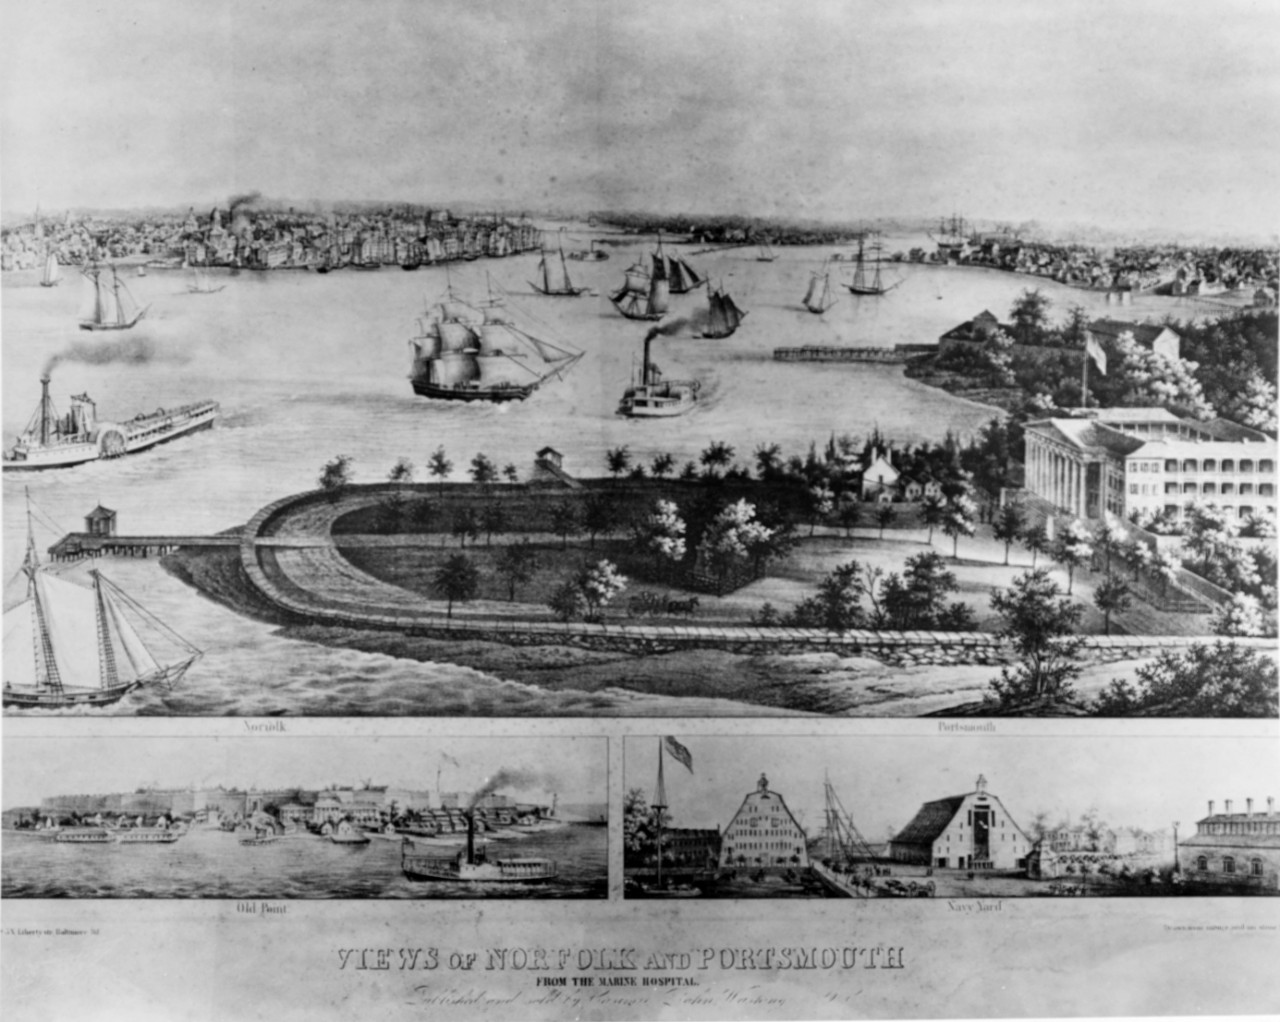 "Views of Norfolk and Portsmouth from the Marine Hospital"